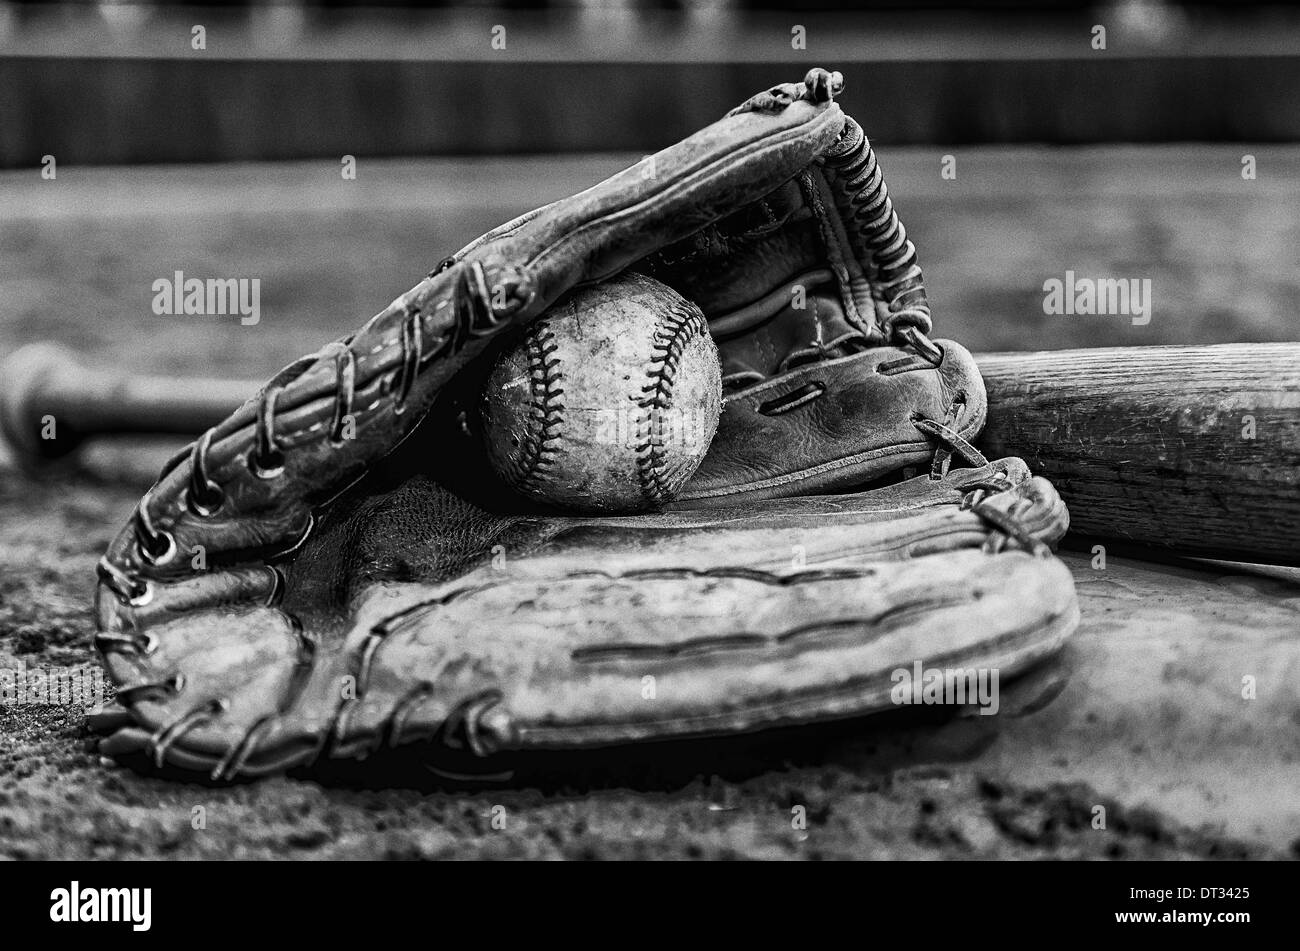 Baseball glory days with ball in glove and bat on base on field. Monochrome image with outfield wall in background. Stock Photo